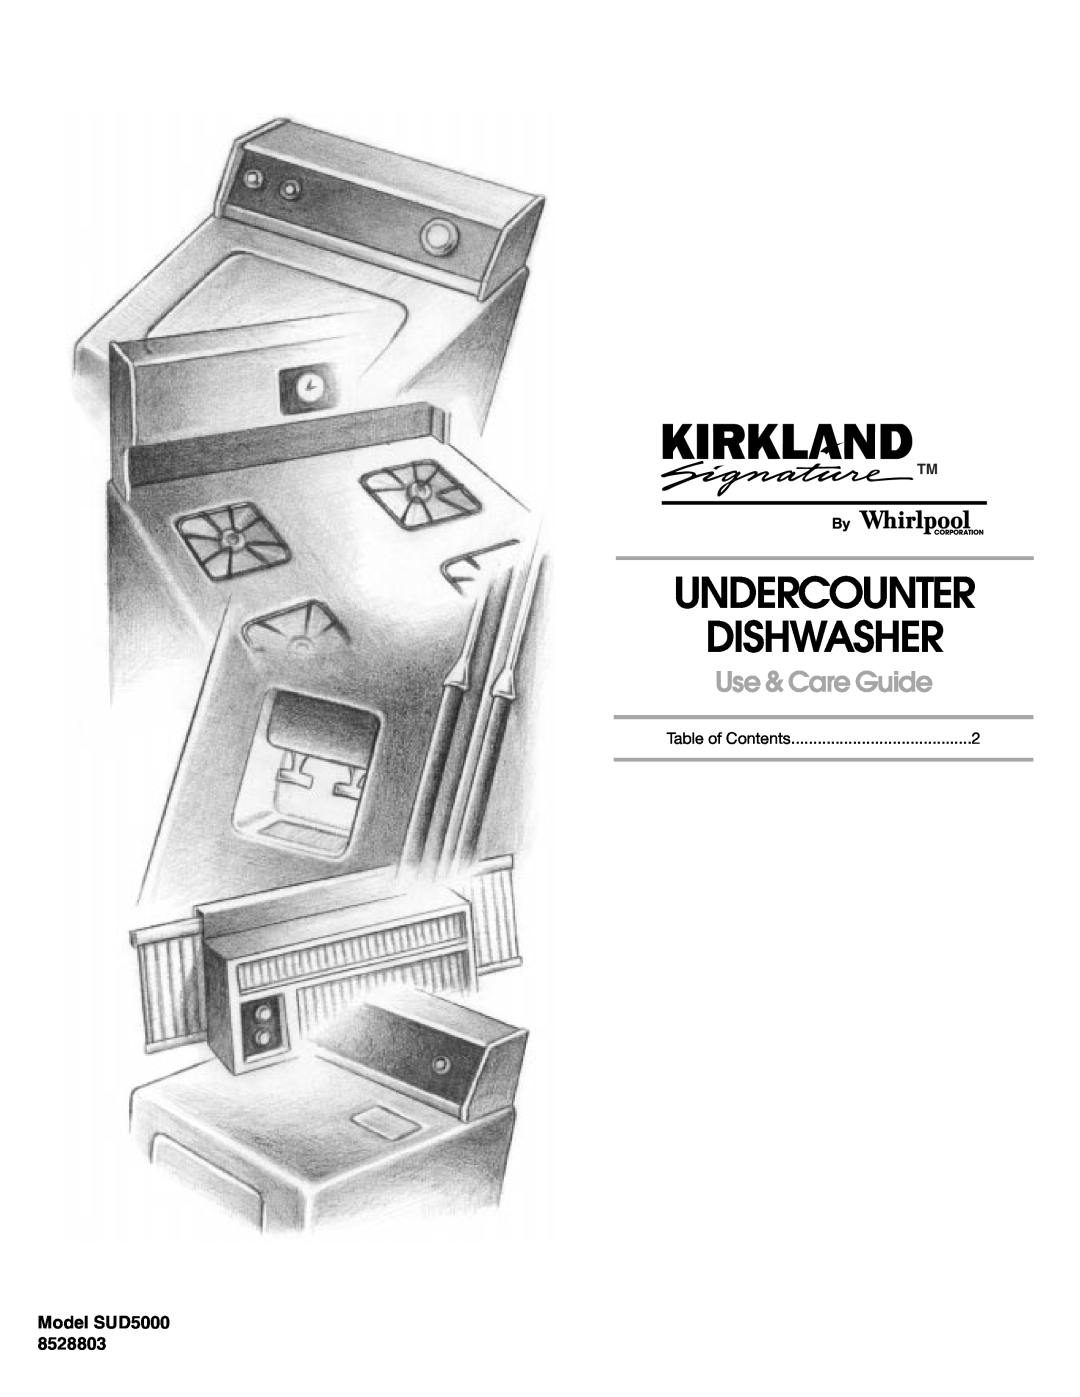 Whirlpool SUD5000 manual Undercounter Dishwasher, Use & Care Guide 